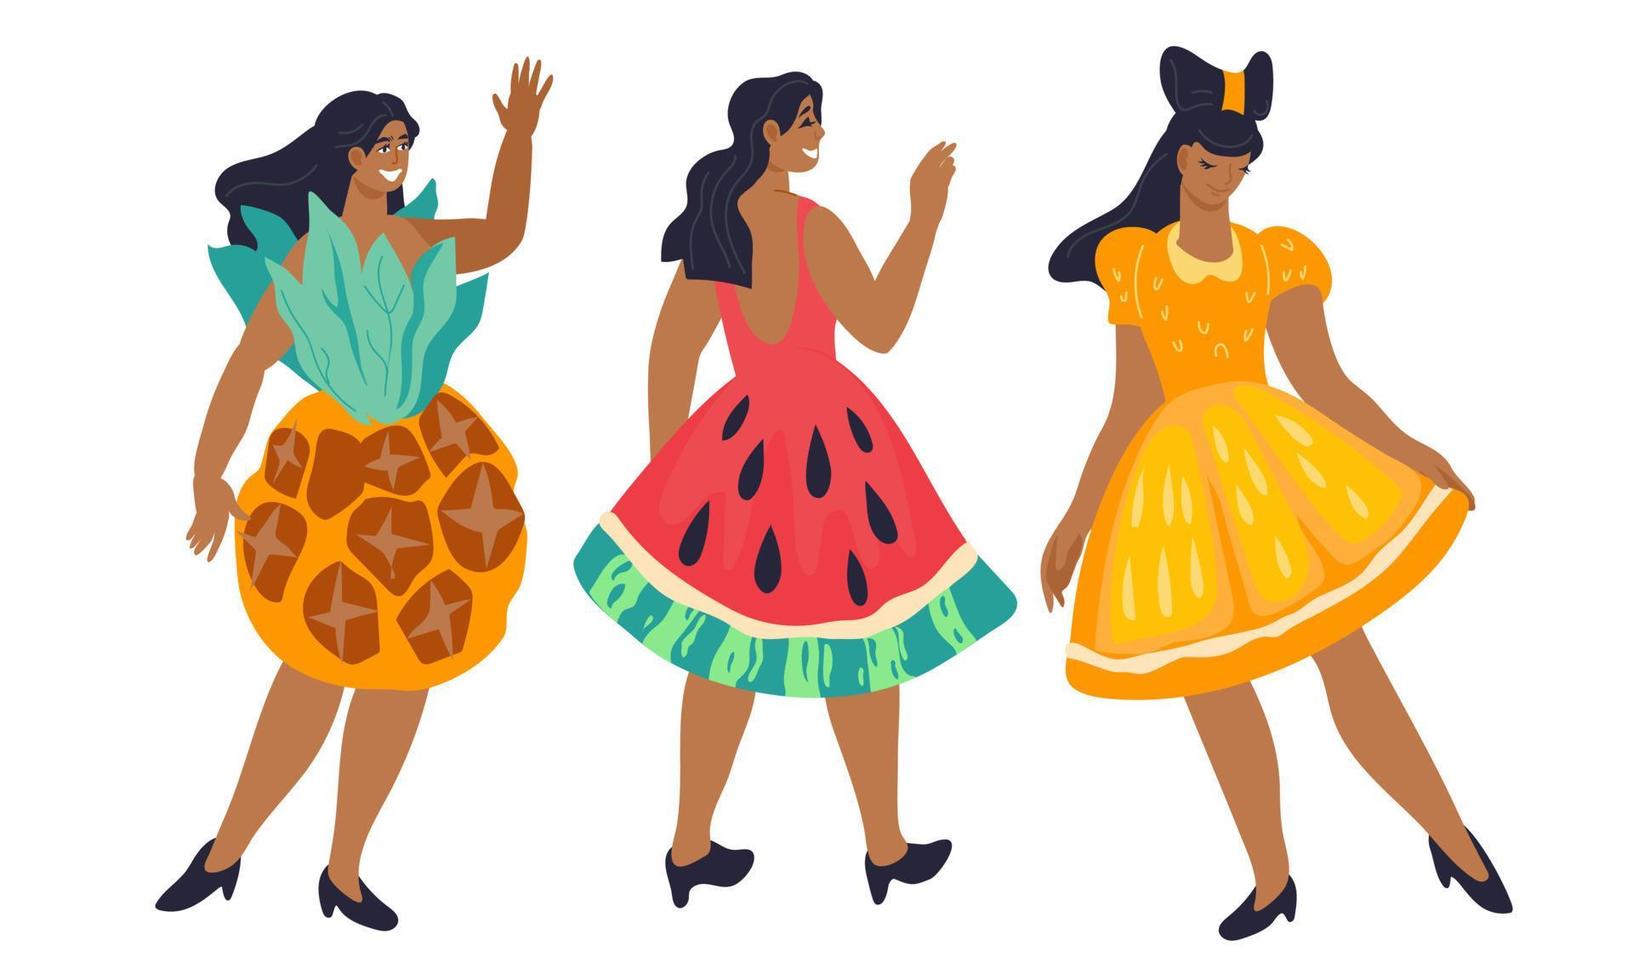 Women characters in creative dresses in shape of tropical fruits for summer party banner or invitation. Holiday design for cocktail bar or dance rave. Flat cartoon vector illustration isolated.